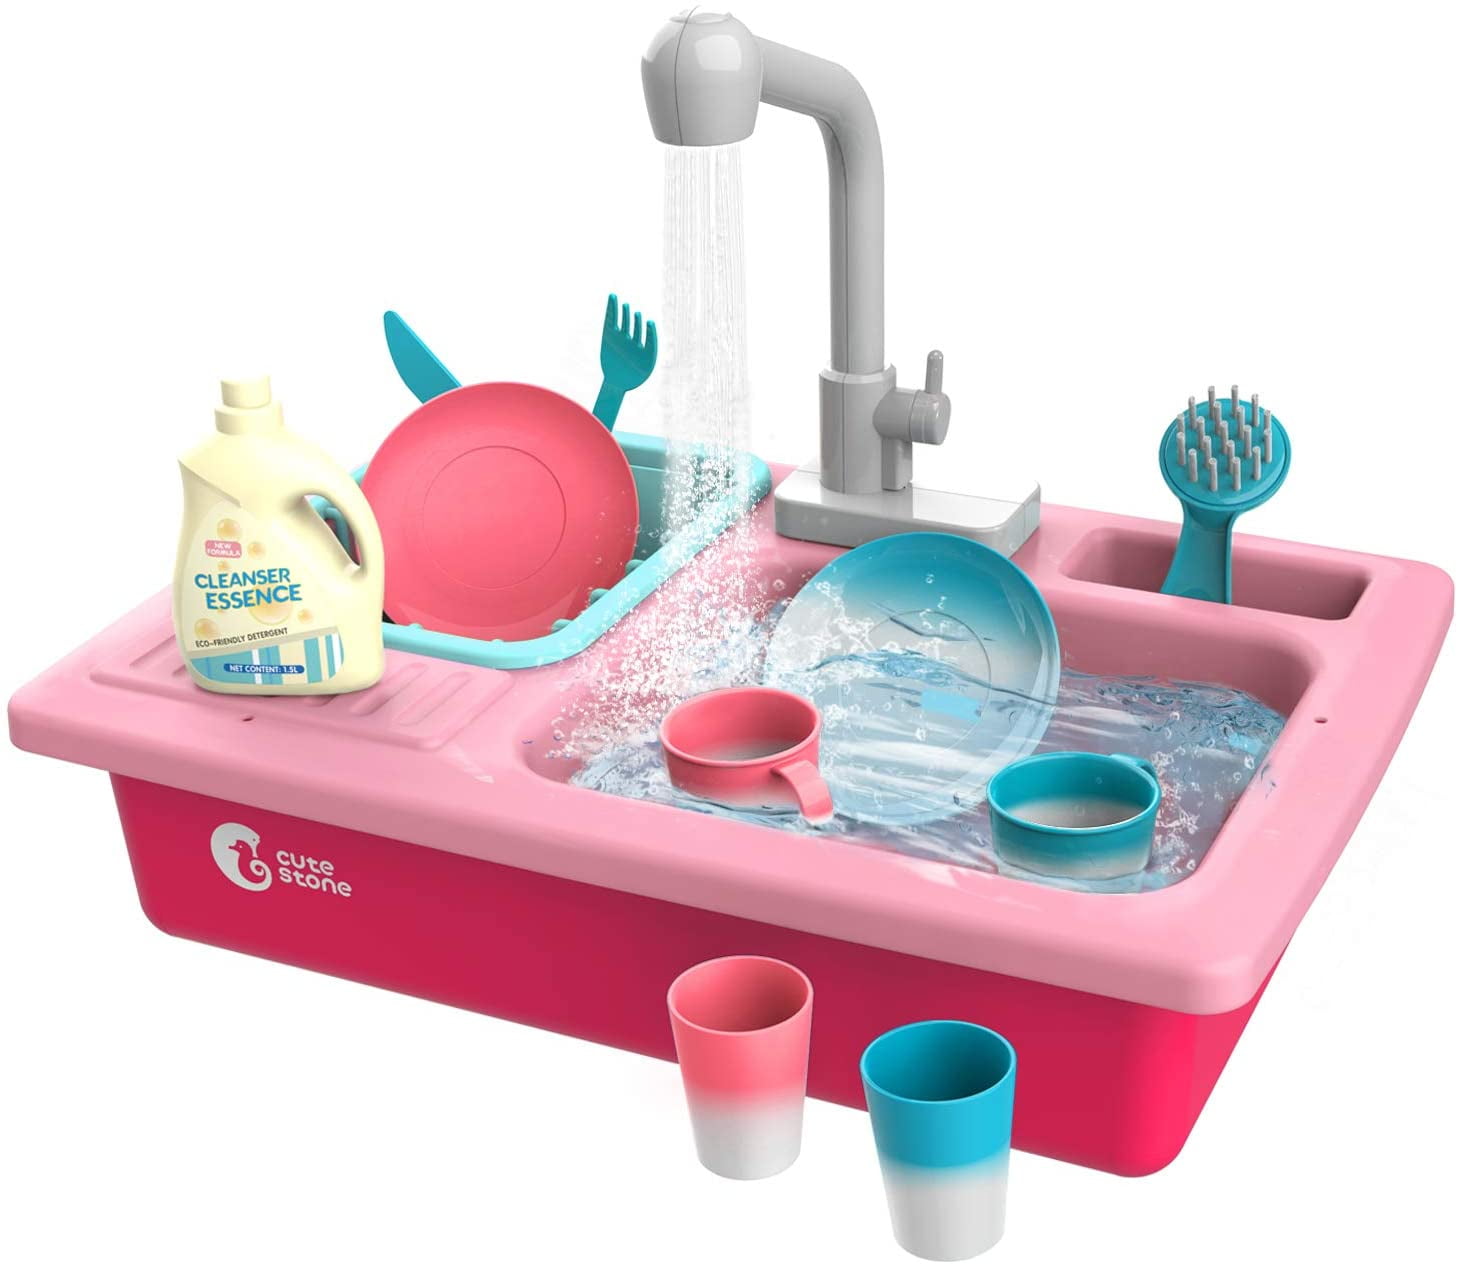 Pretend Play Kitchen Sink Play Set Toys With Running Water Dishwasher for Kids 